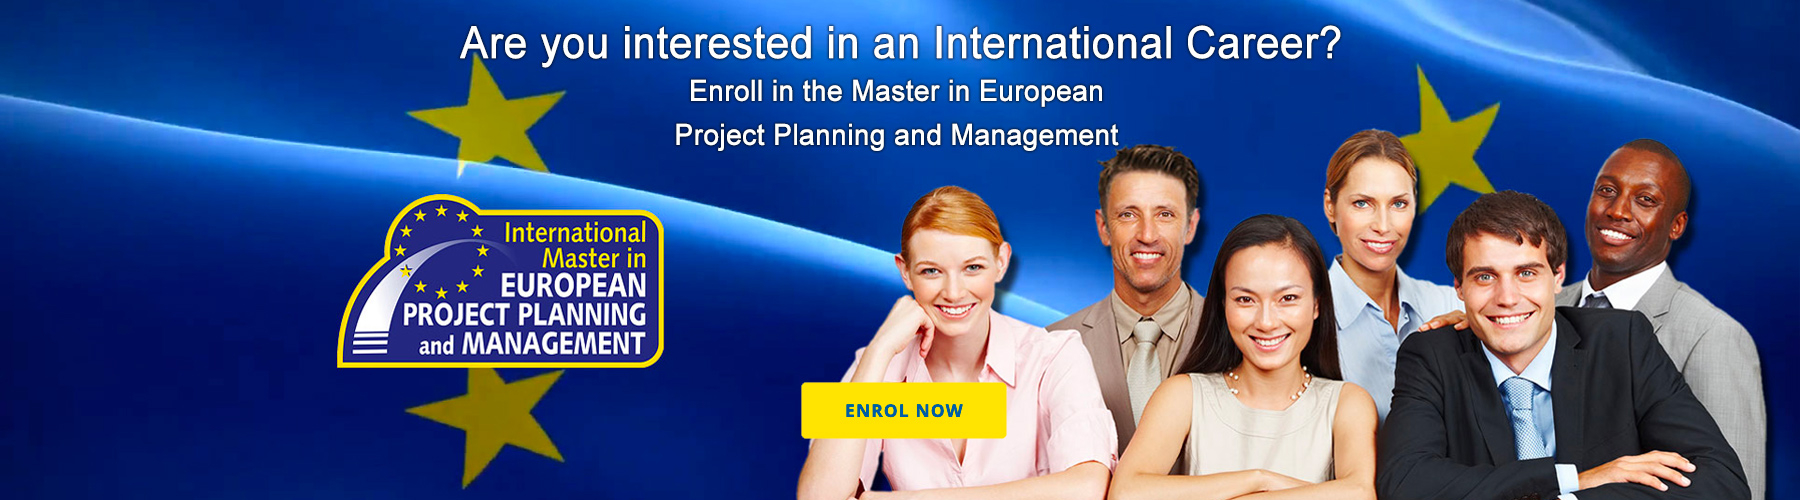 Are you interested in an International career?